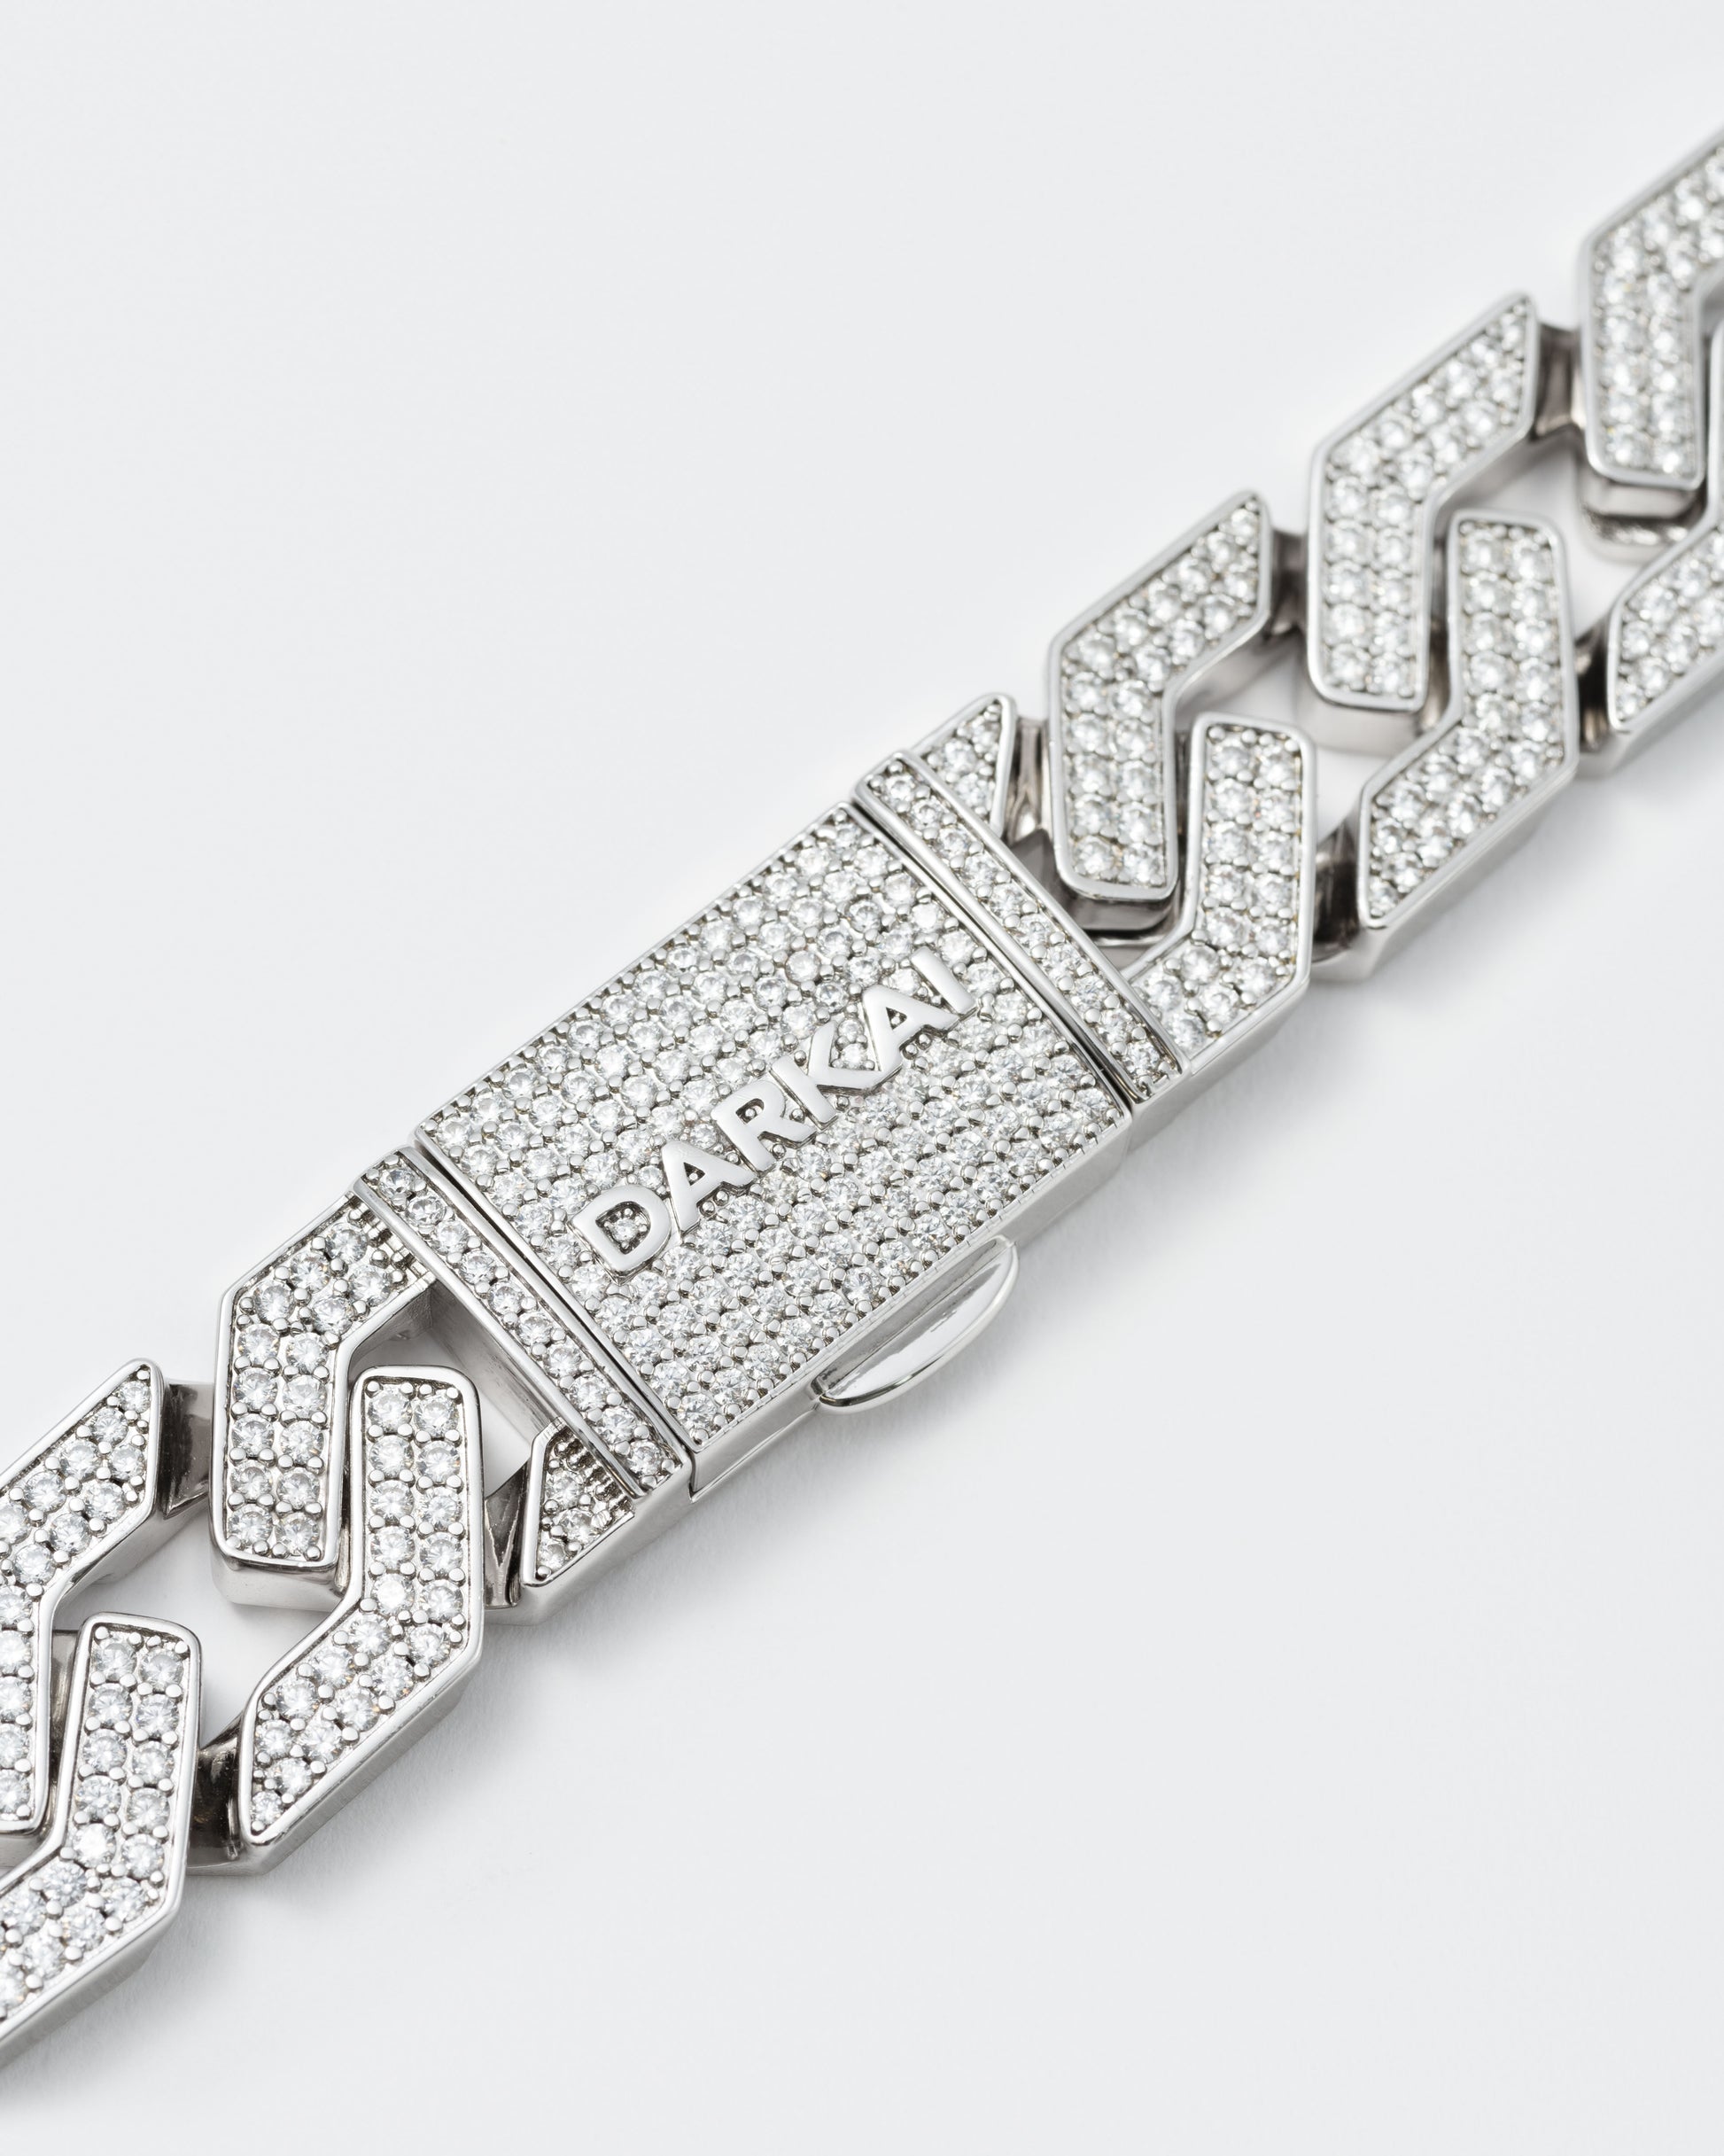 detail of oversize prong chain necklace with 18kt white gold coating and hand-set micropavé stones in diamond white. Fine jewelry grade drawer closure with logo